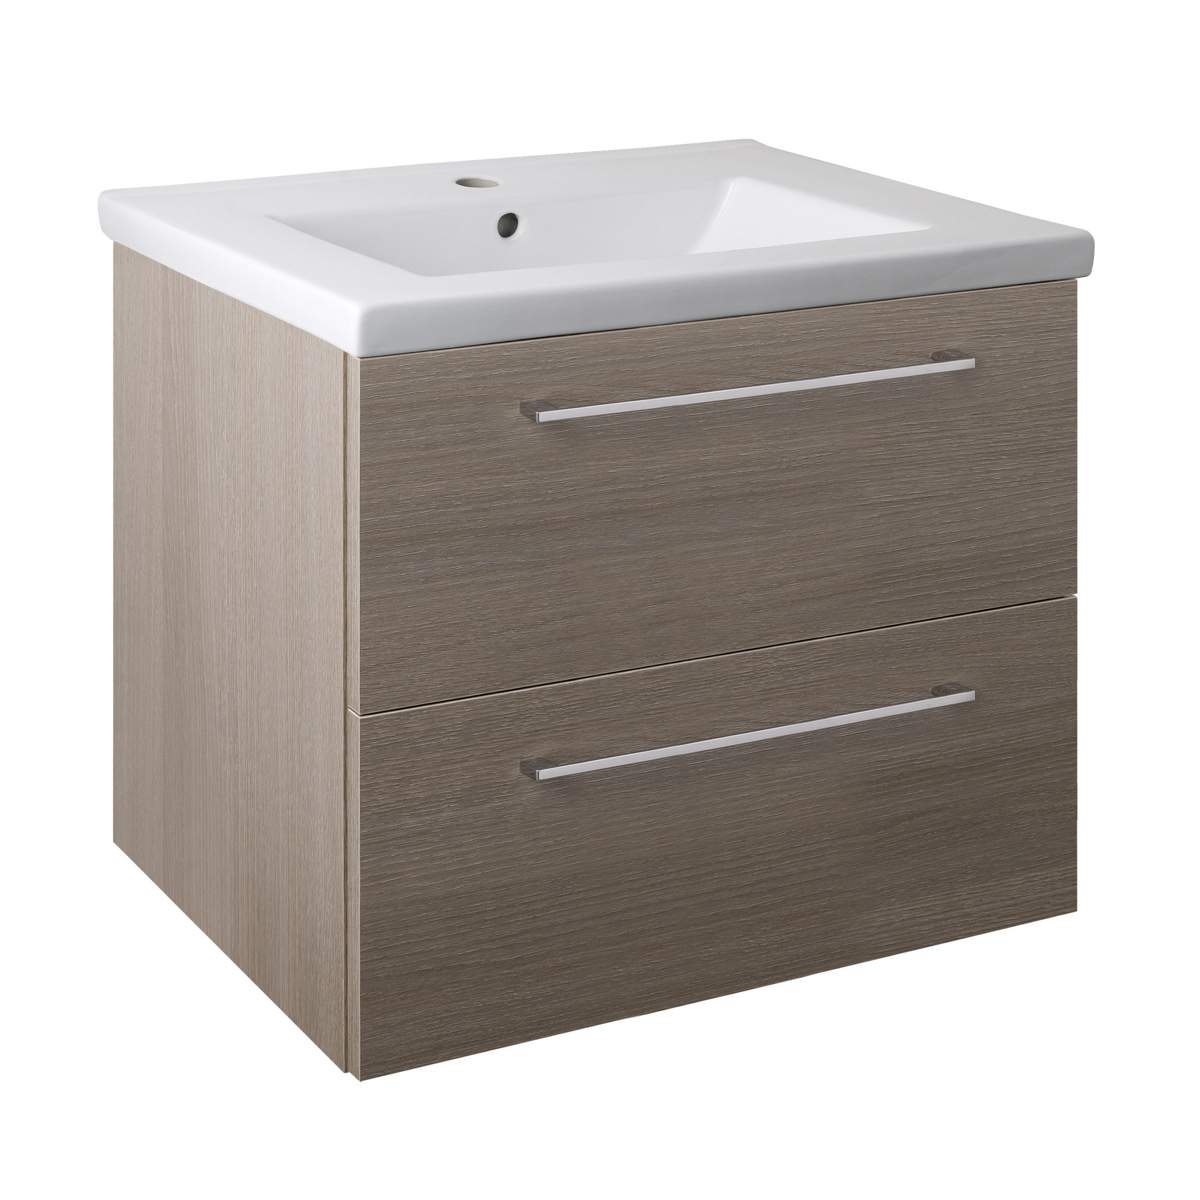 JTP Pace Units 600mm Wall Mounted Unit with Drawers and Basin in Grey (PWM603GR + P600BS)